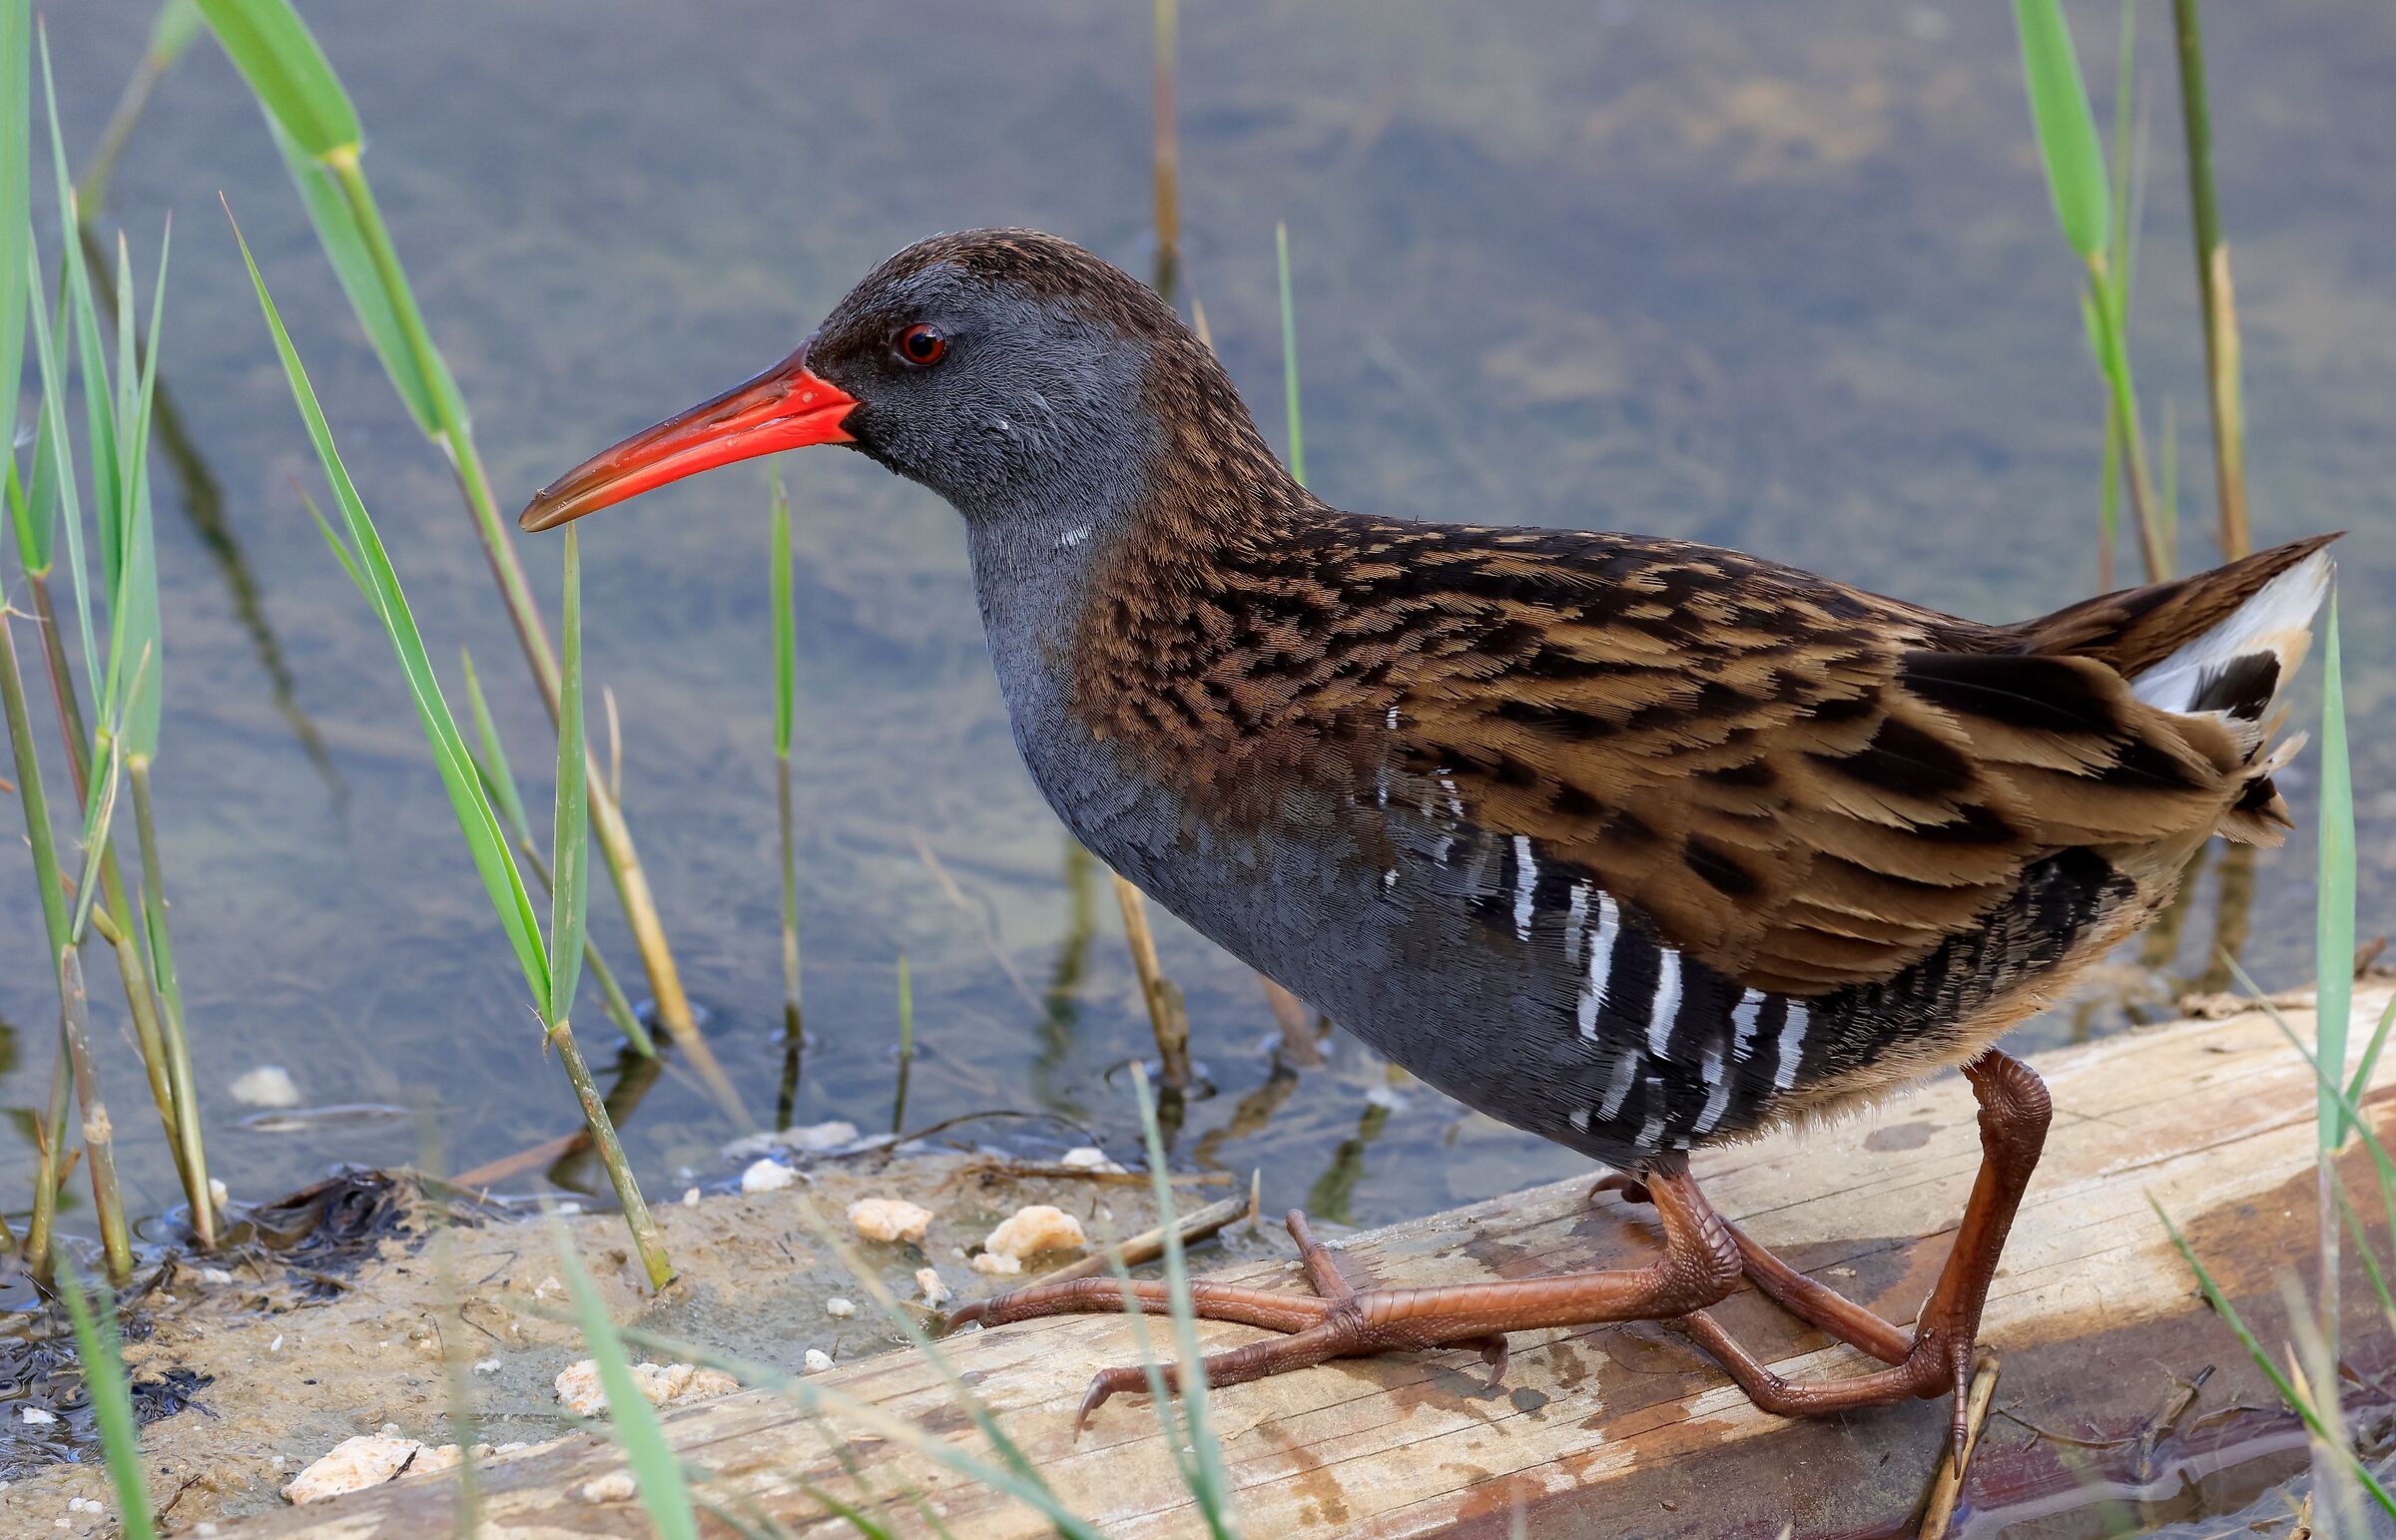 Today cloudy and windy ... and water rail...